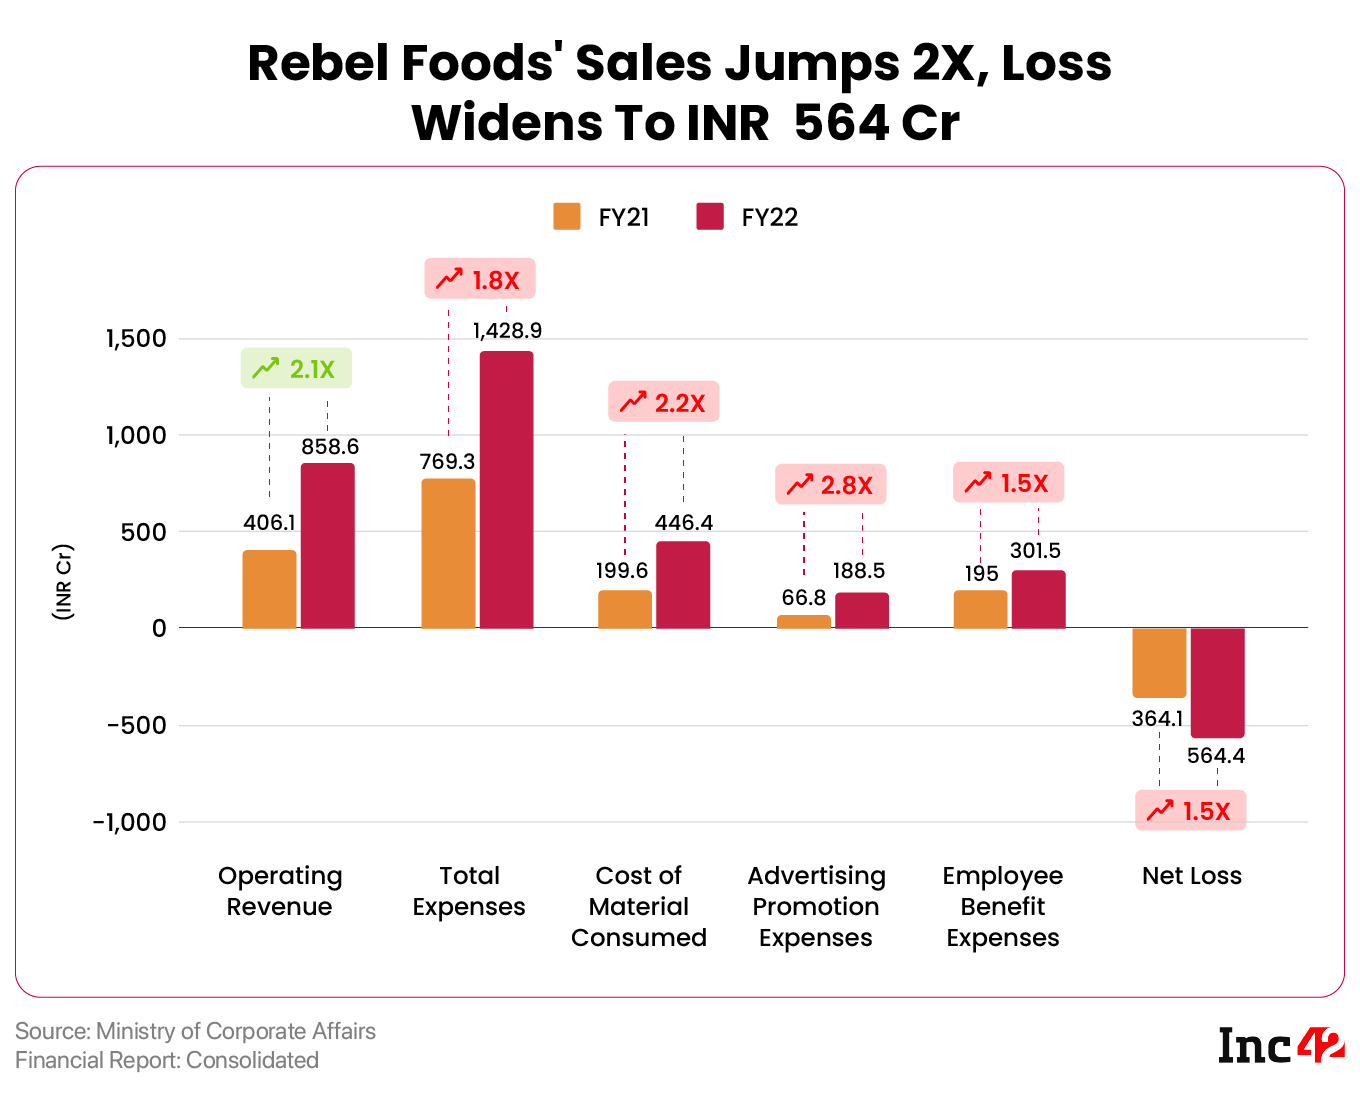 Foodtech Unicorn Rebel Foods’ Loss Surges 55% To INR 564 Cr In FY22, Revenue Jumps To INR 857 Cr - Inc42 (Picture 2)